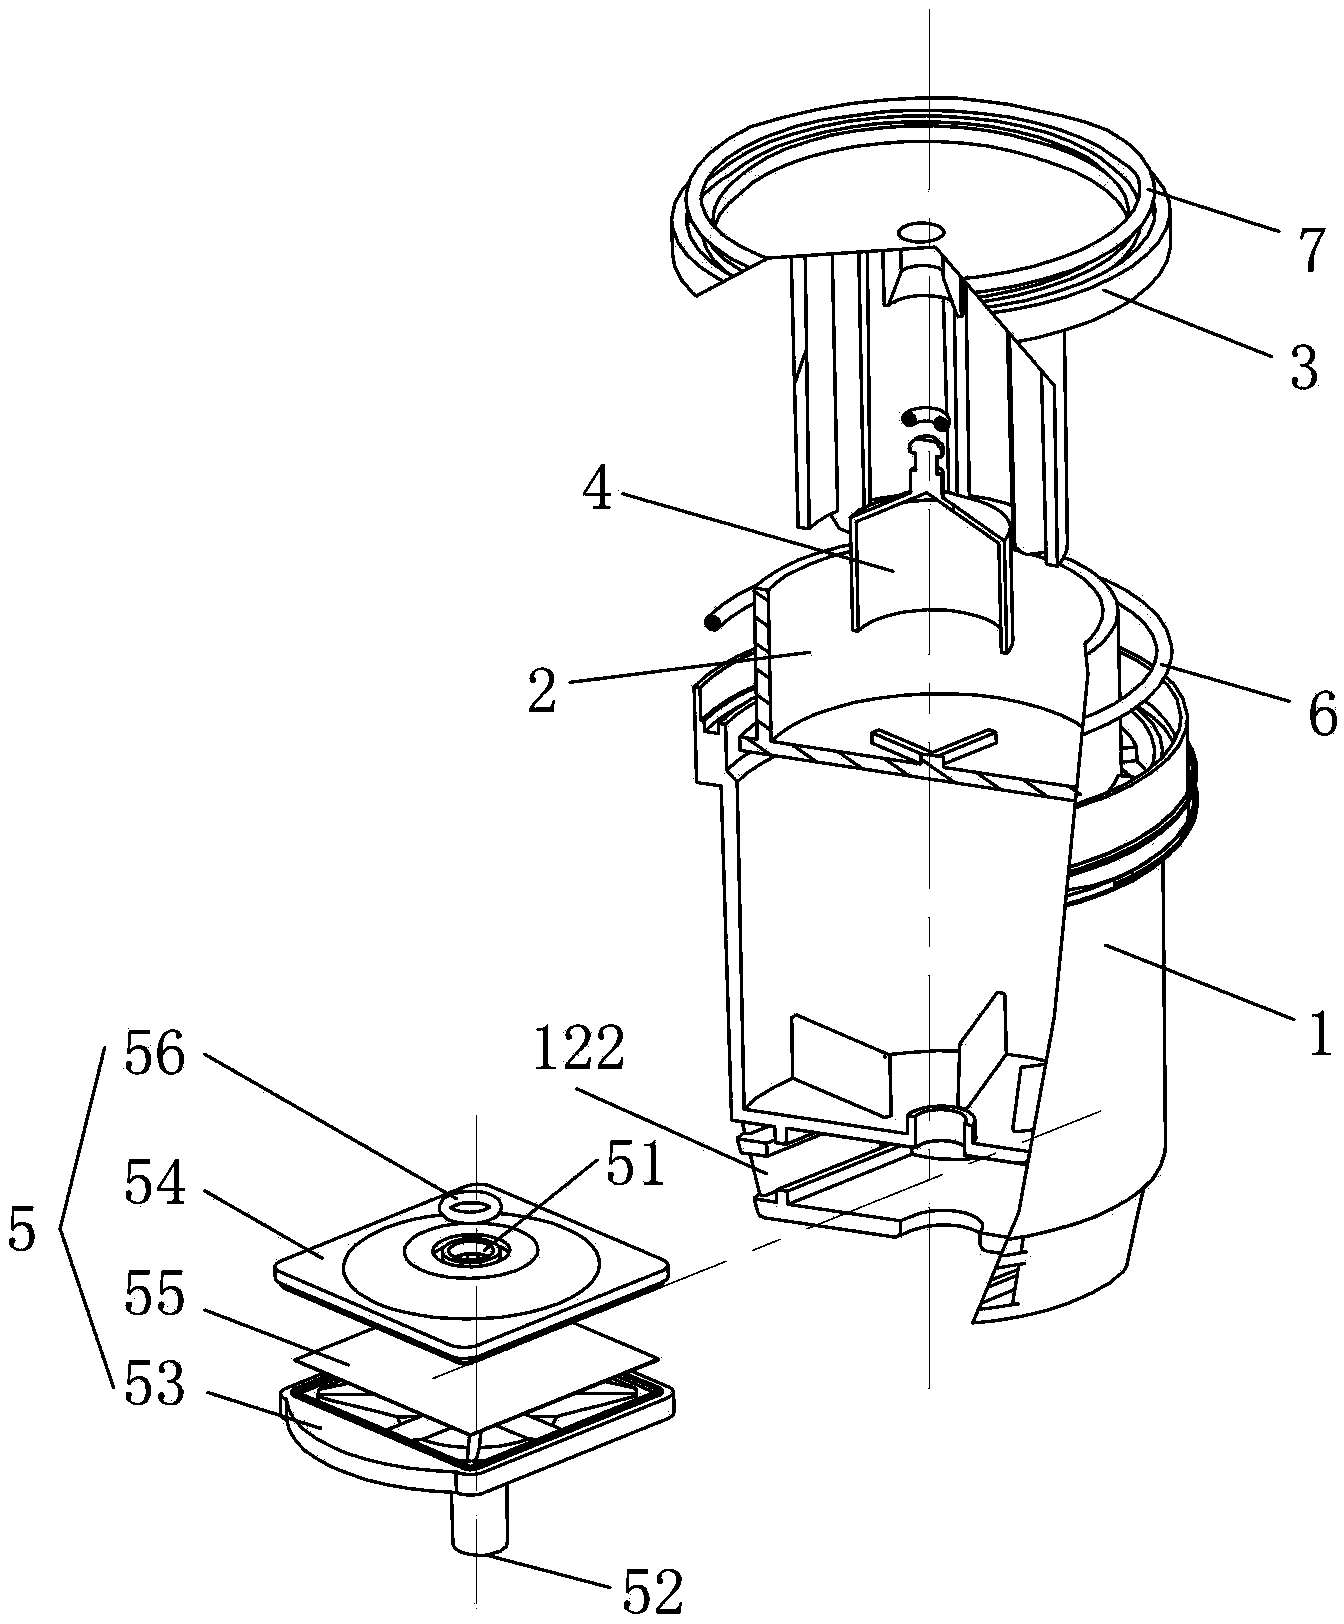 Overflow protection cup and negative pressure regulator